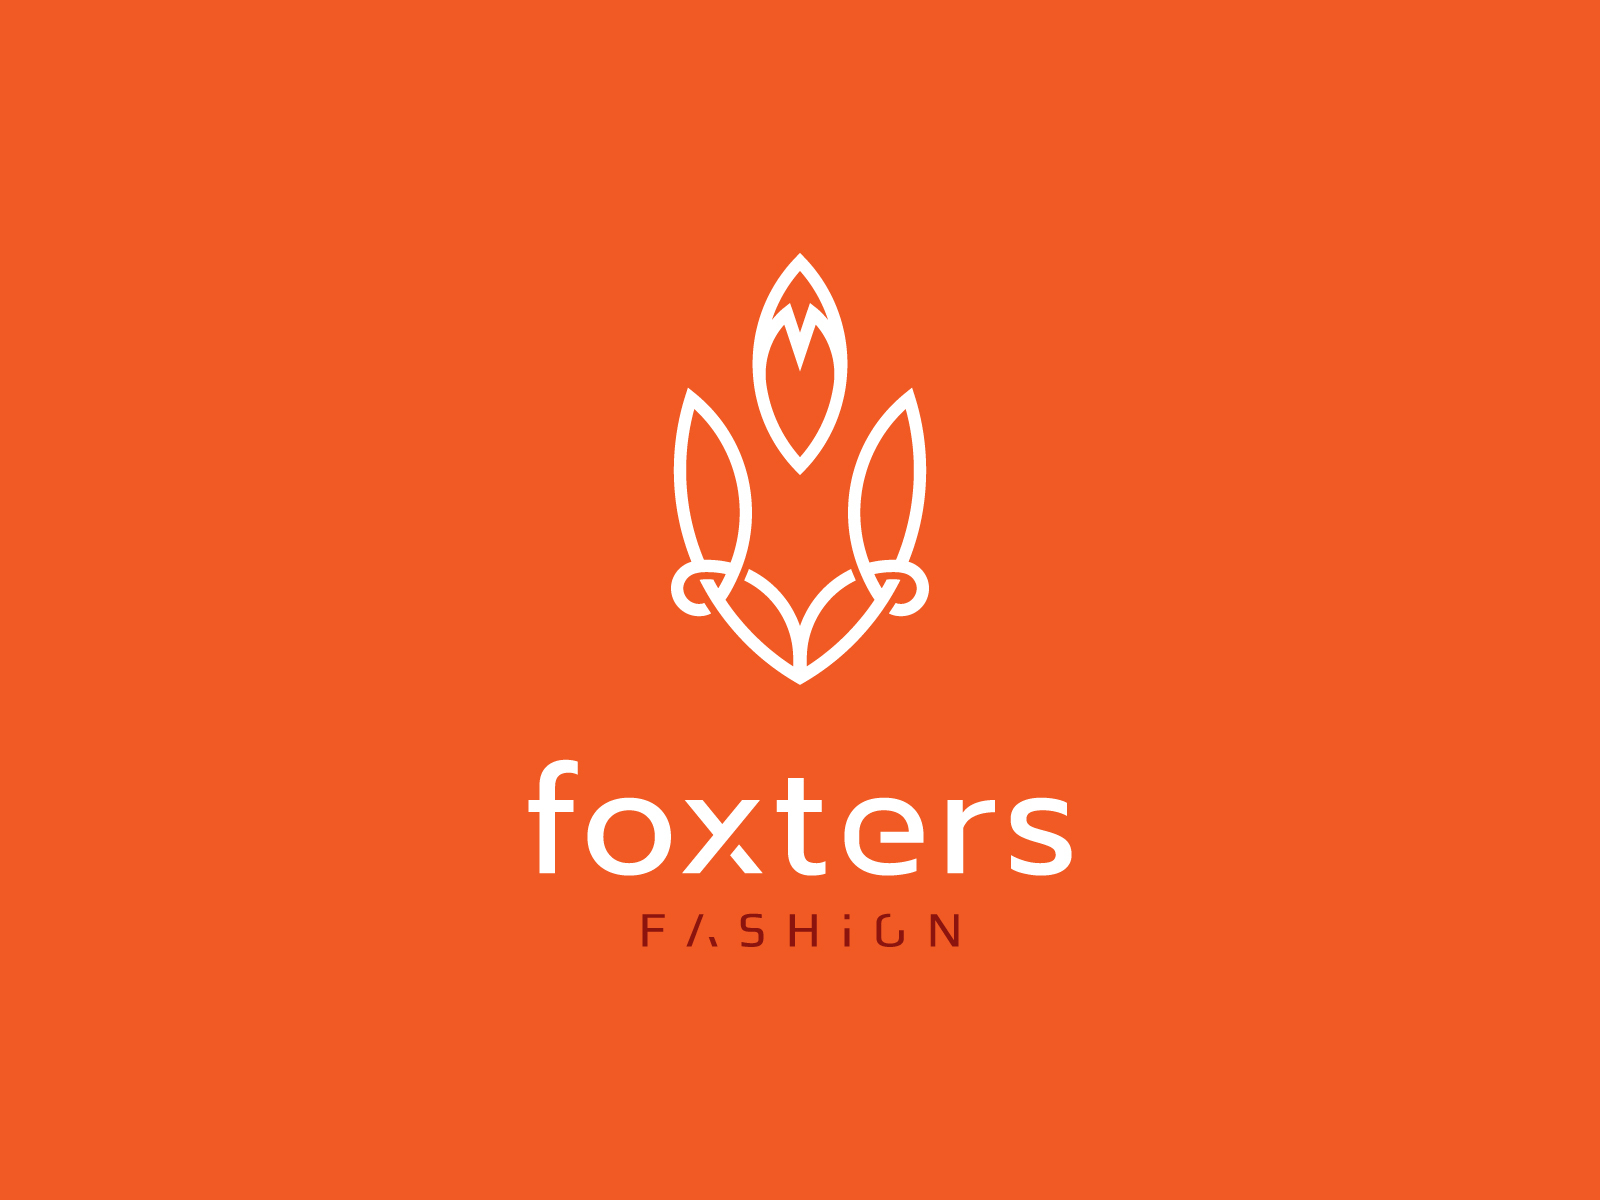 Foxters Fashion - Logo and golden ratio grid by DAINOGO on Dribbble